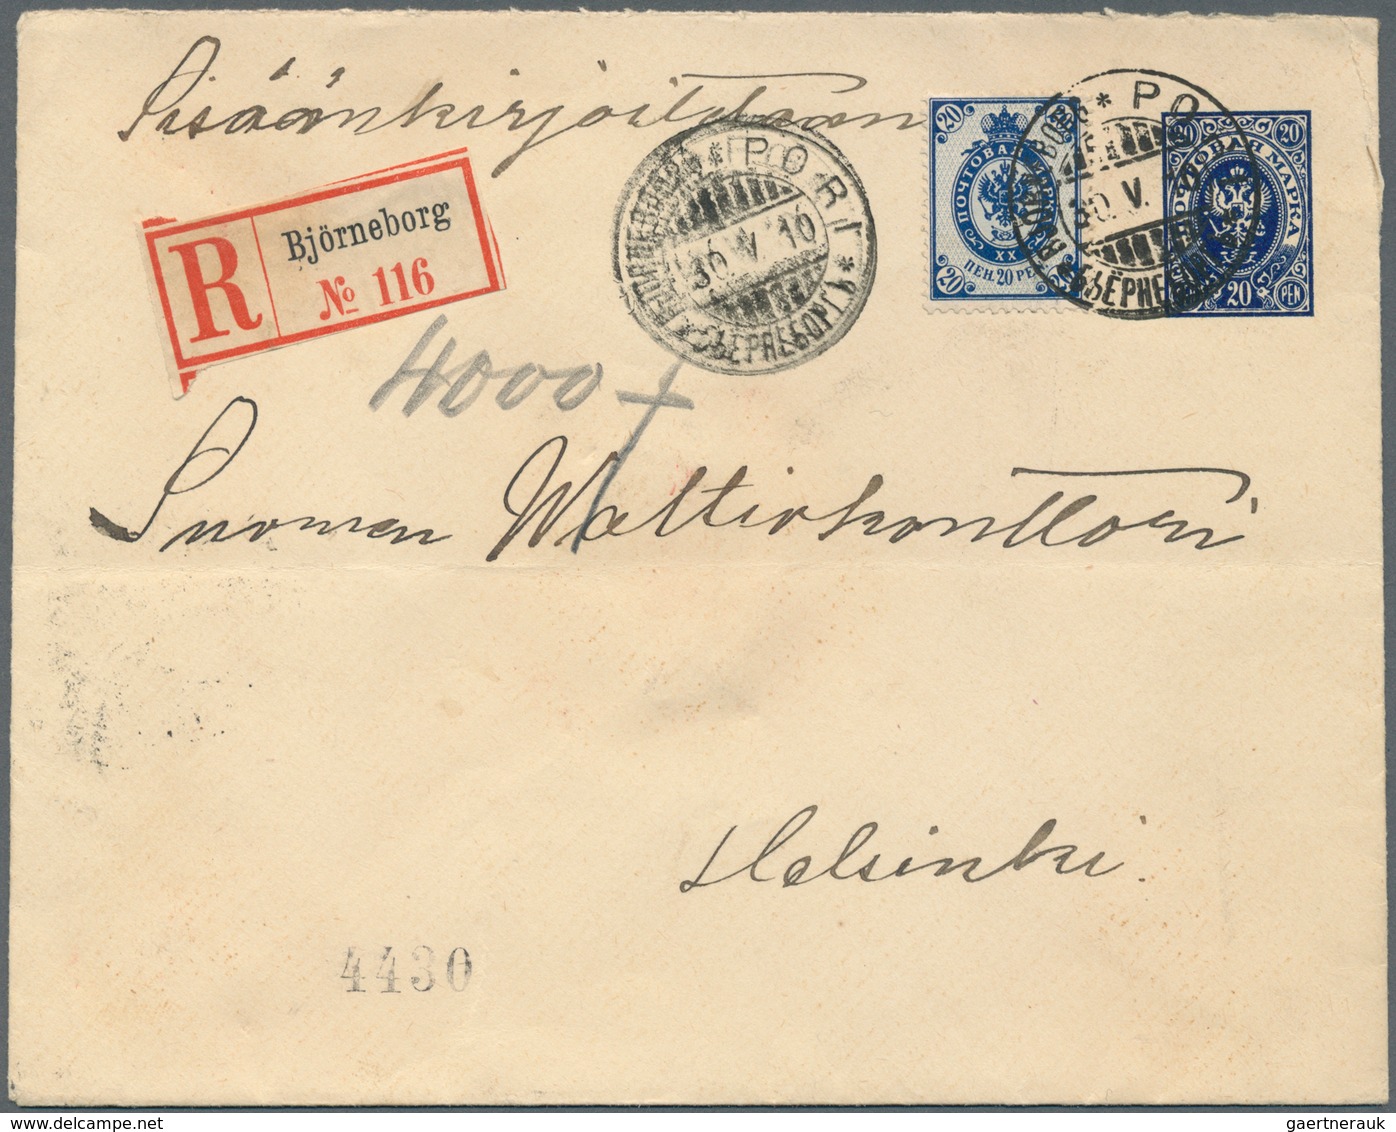 Finnland - Ganzsachen: 1872 from, comprehensive lot of 153 predominantly used postal stationeries co